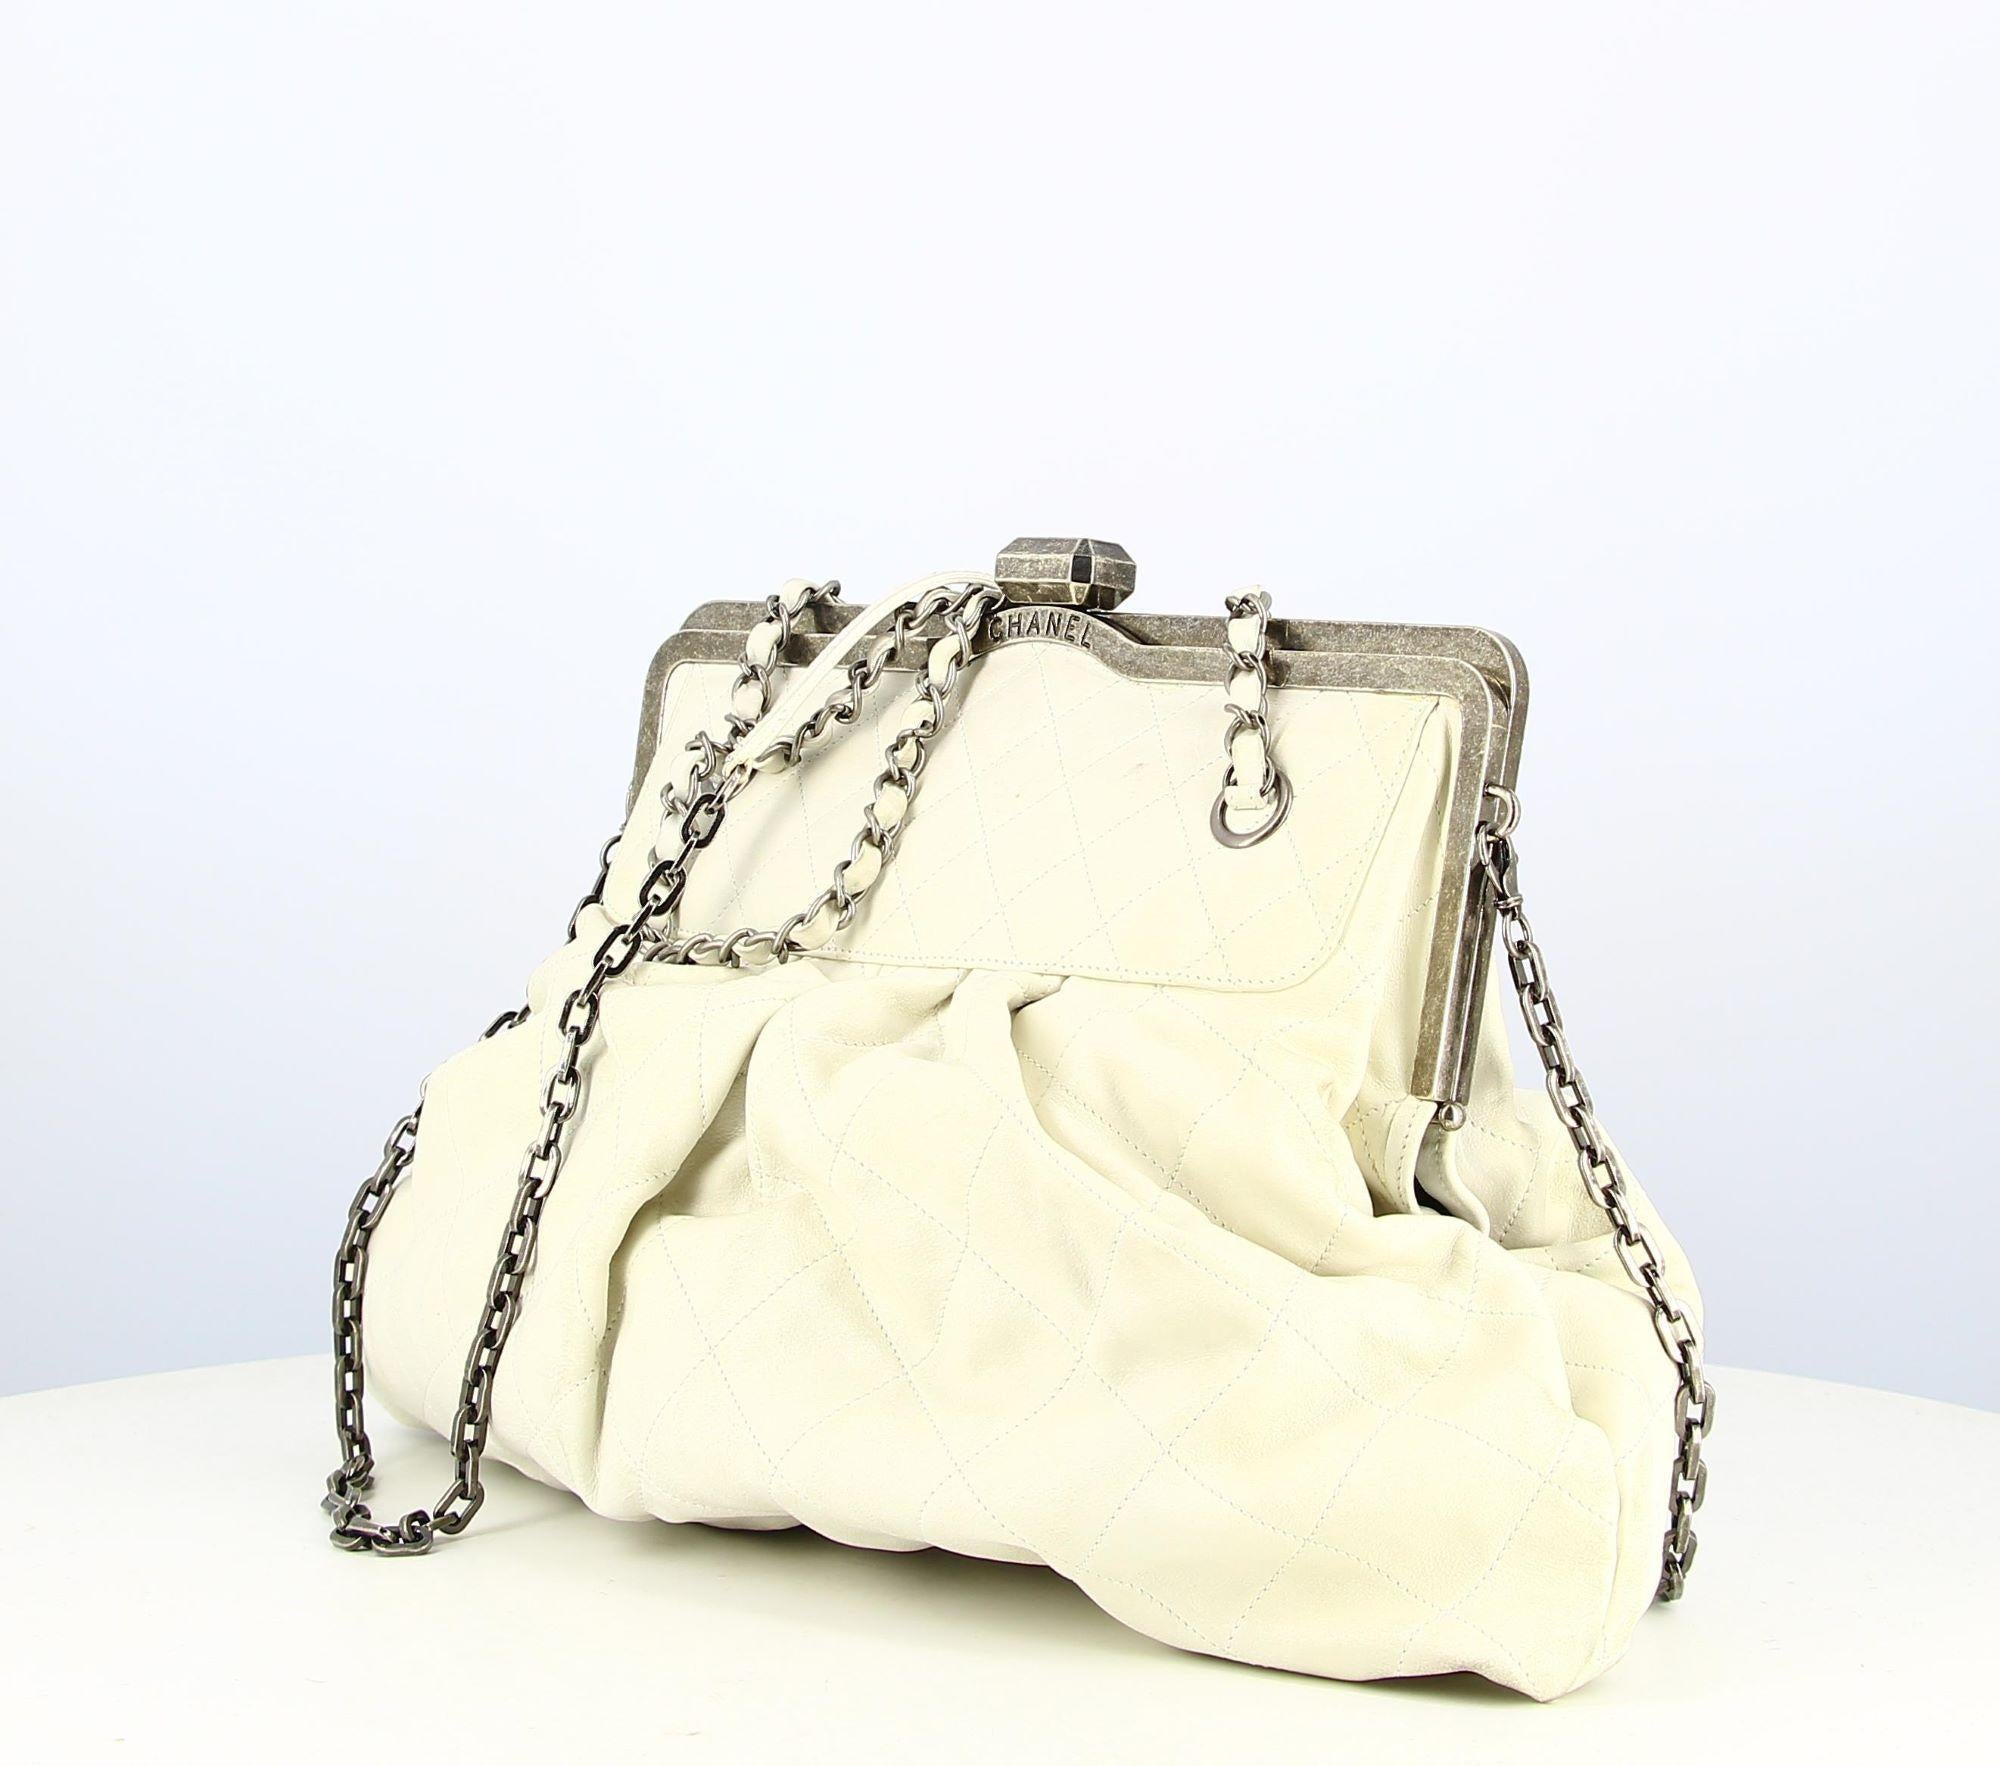 Chanel White Leather Quilted Handbag
- Good condition, shows slight wear and tear with time
- Chanel clutch handbag, small silver chain strap + long crossbody strap, silver clasp
- The interior is in black fabric, small pocket inside zipped
- No